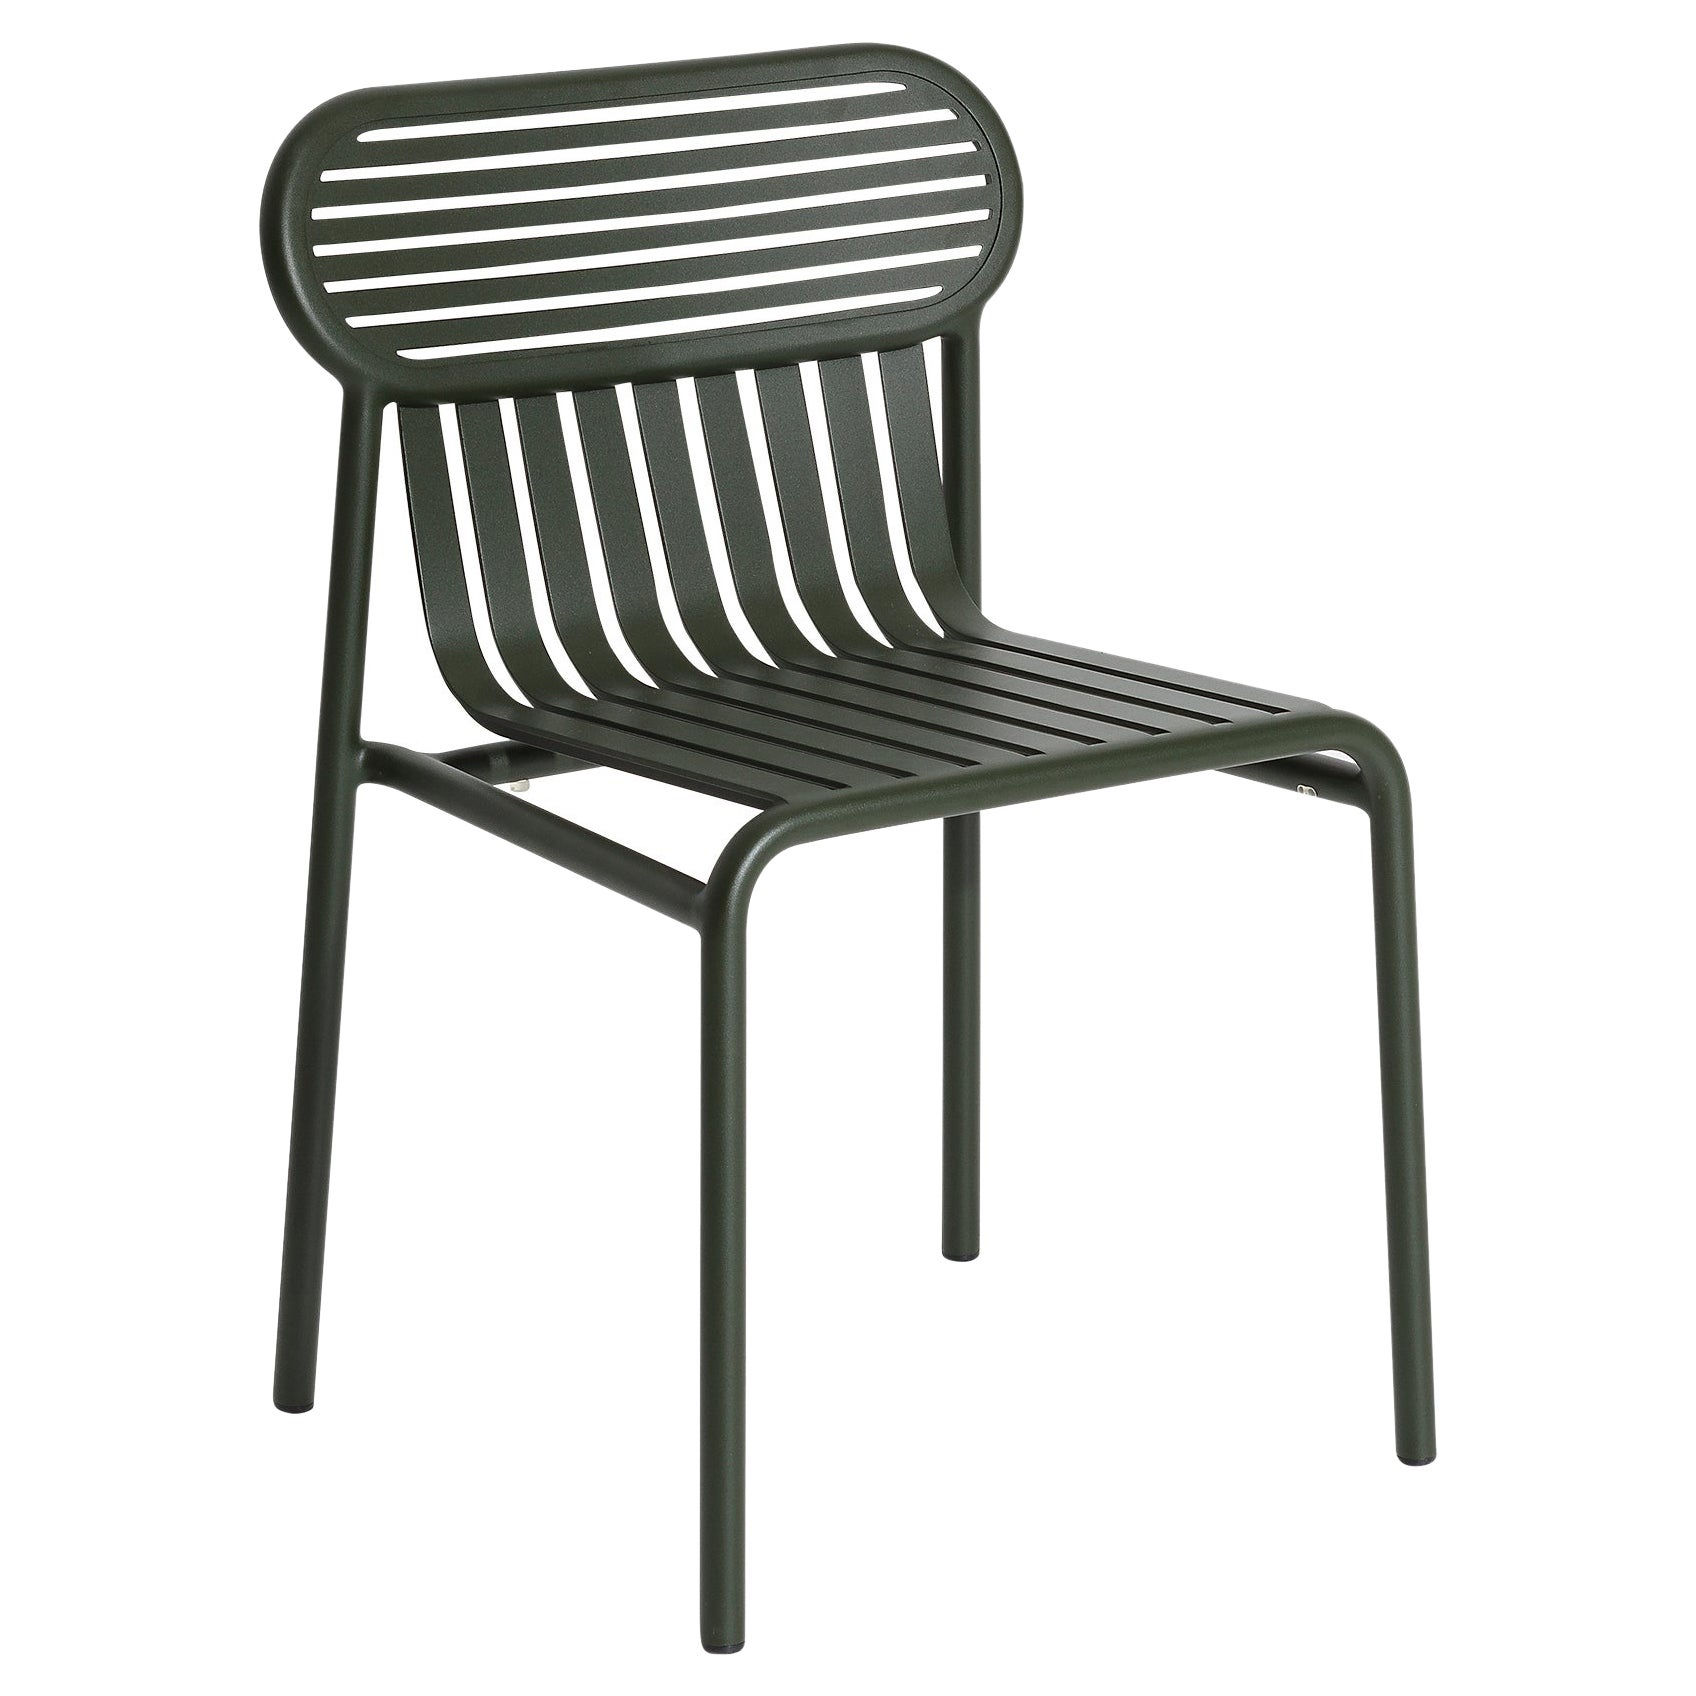 Petite Friture Week-End Chair in Glass Green Aluminium by Studio BrichetZiegler For Sale